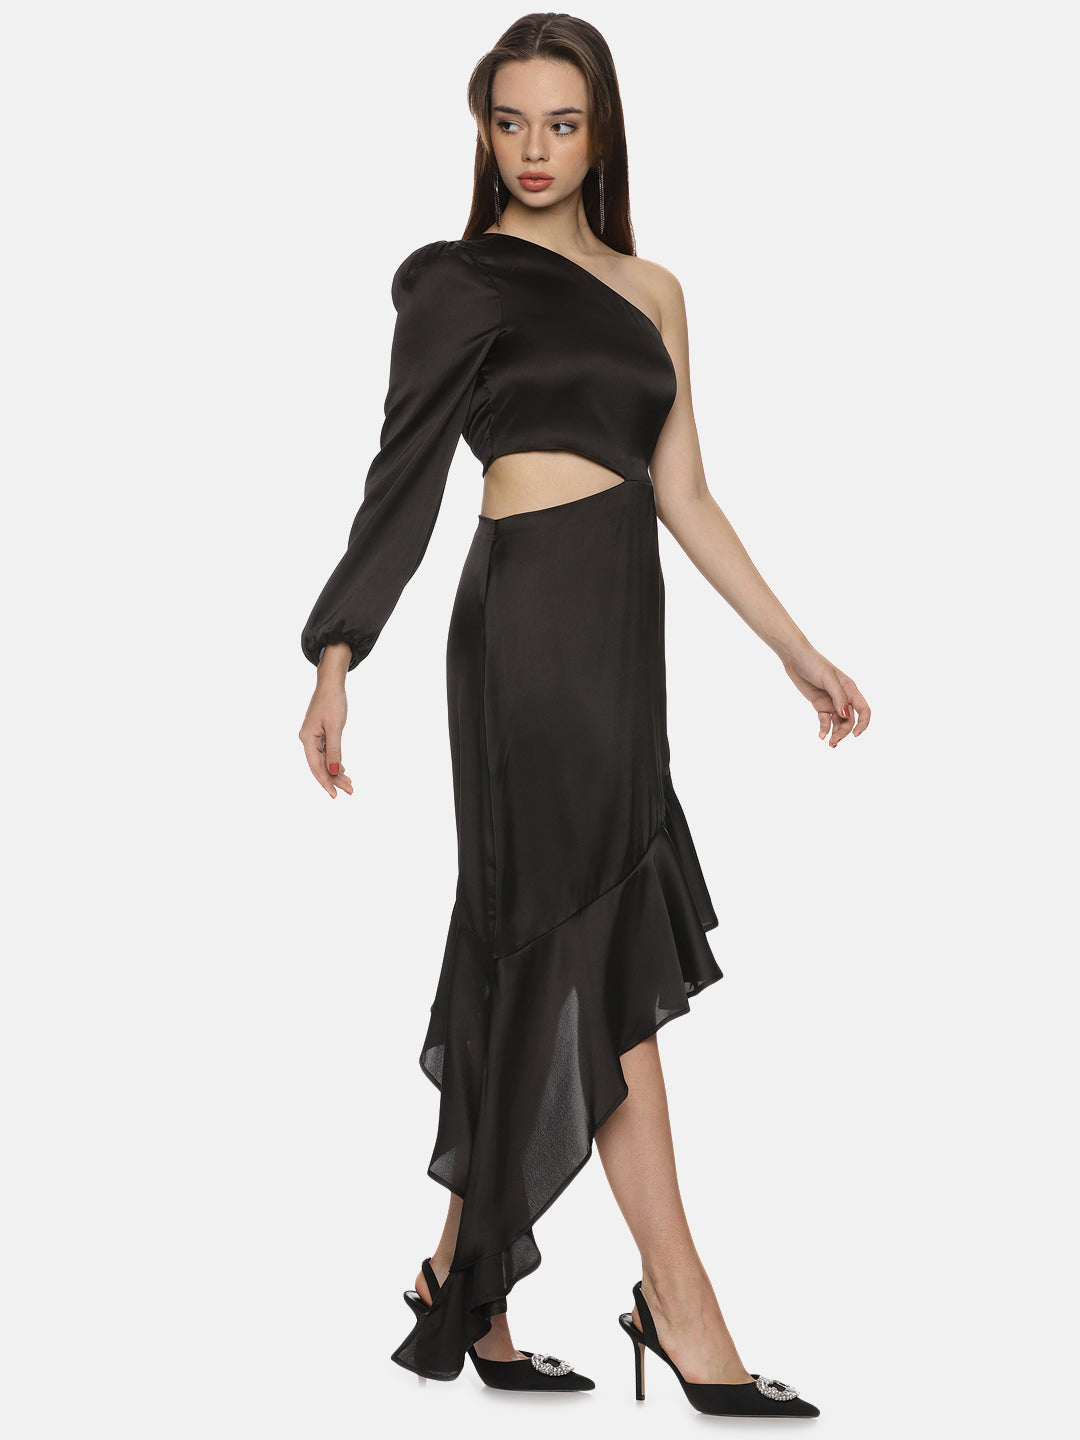 Buy Black Plain Solid Satin Fabric | One Shoulder Asymmetrical Dress Online In India